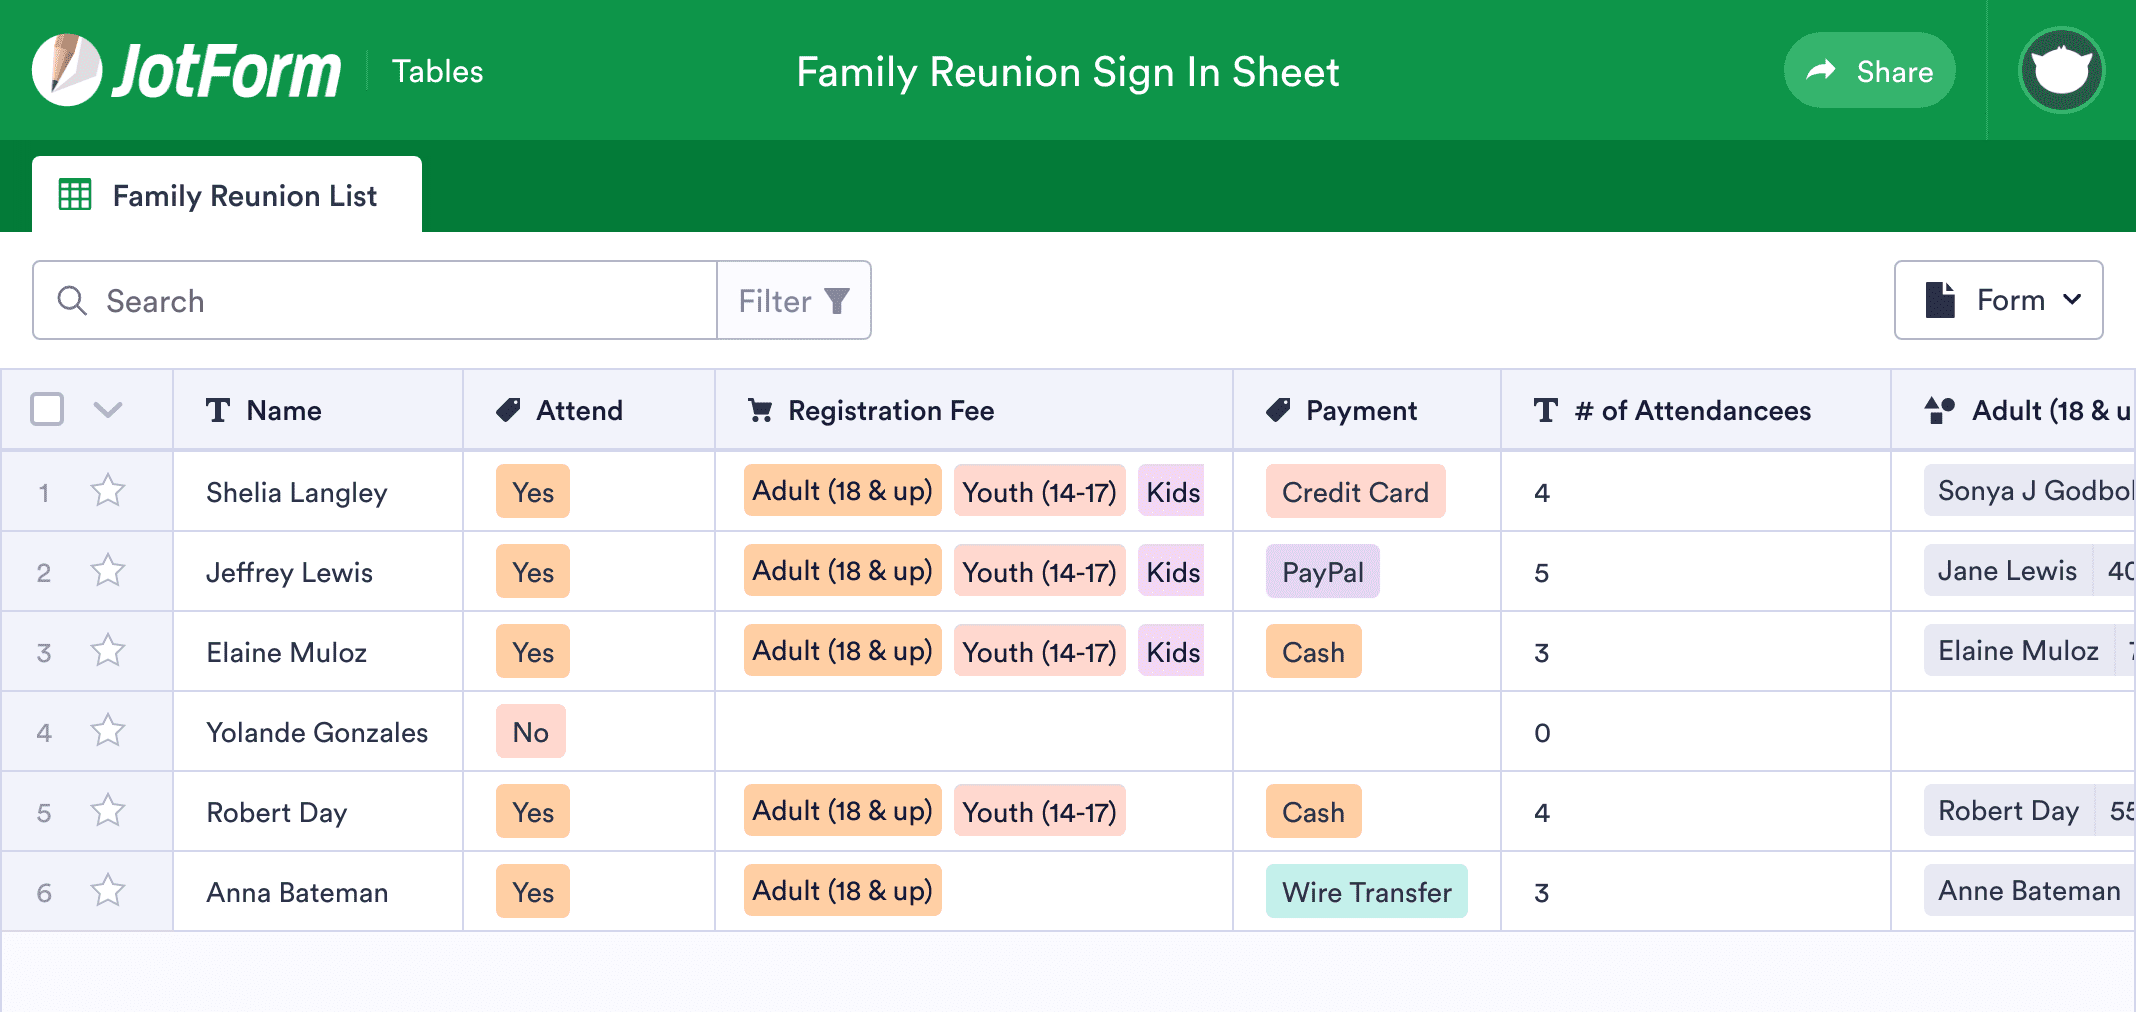 Family Reunion Sign In Sheet Template | JotForm Tables